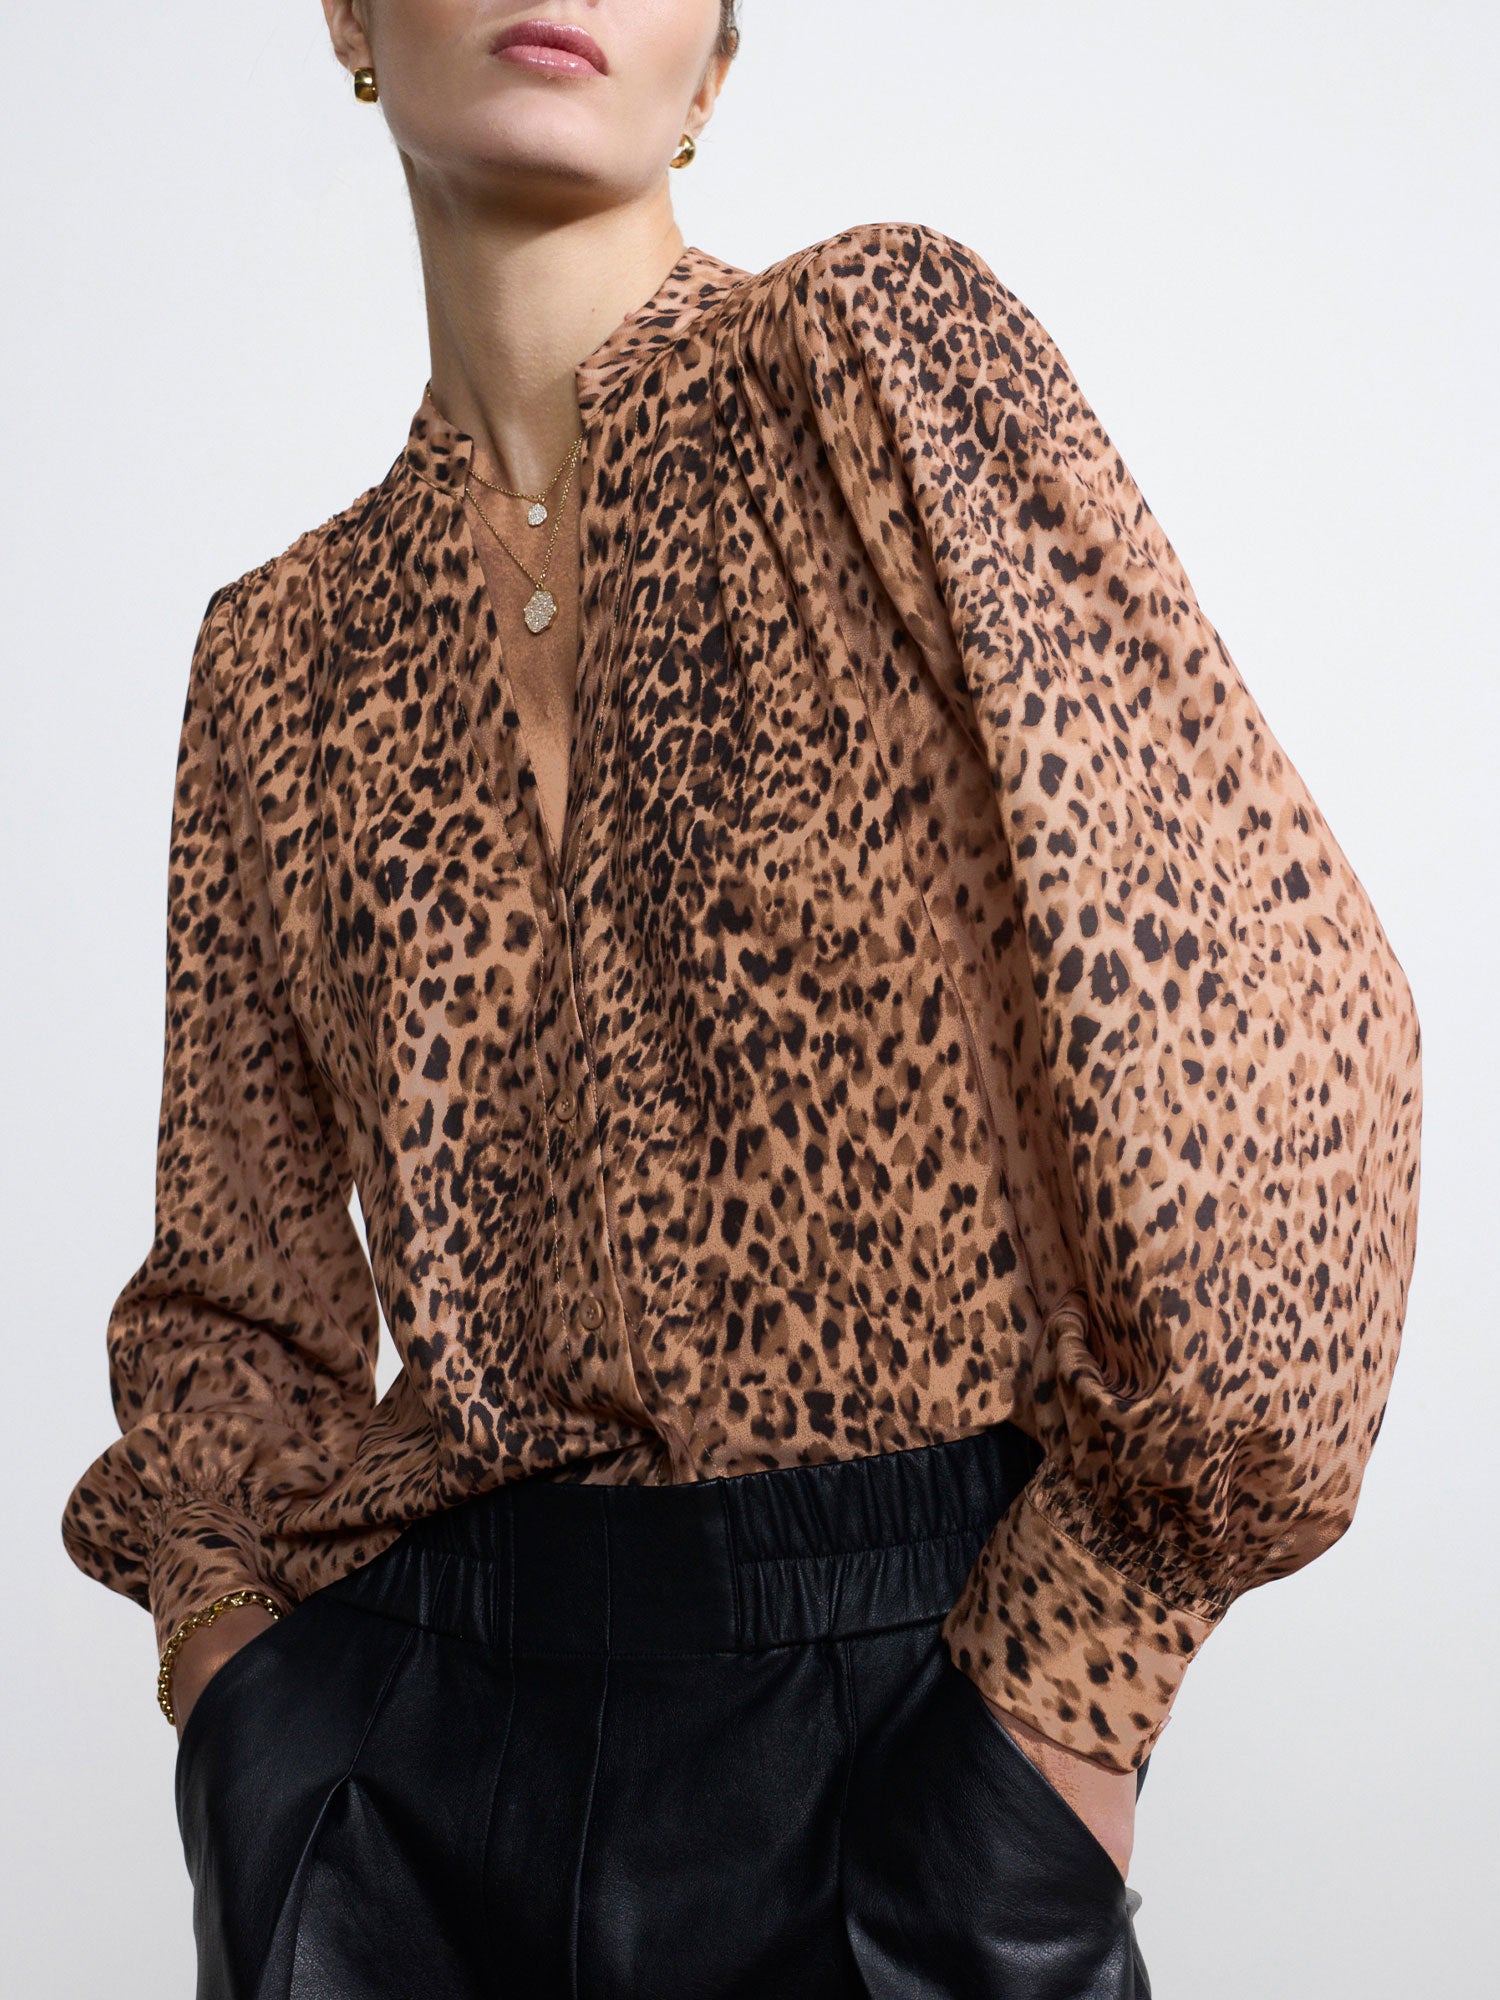 Ember blouse leopard print front view 2